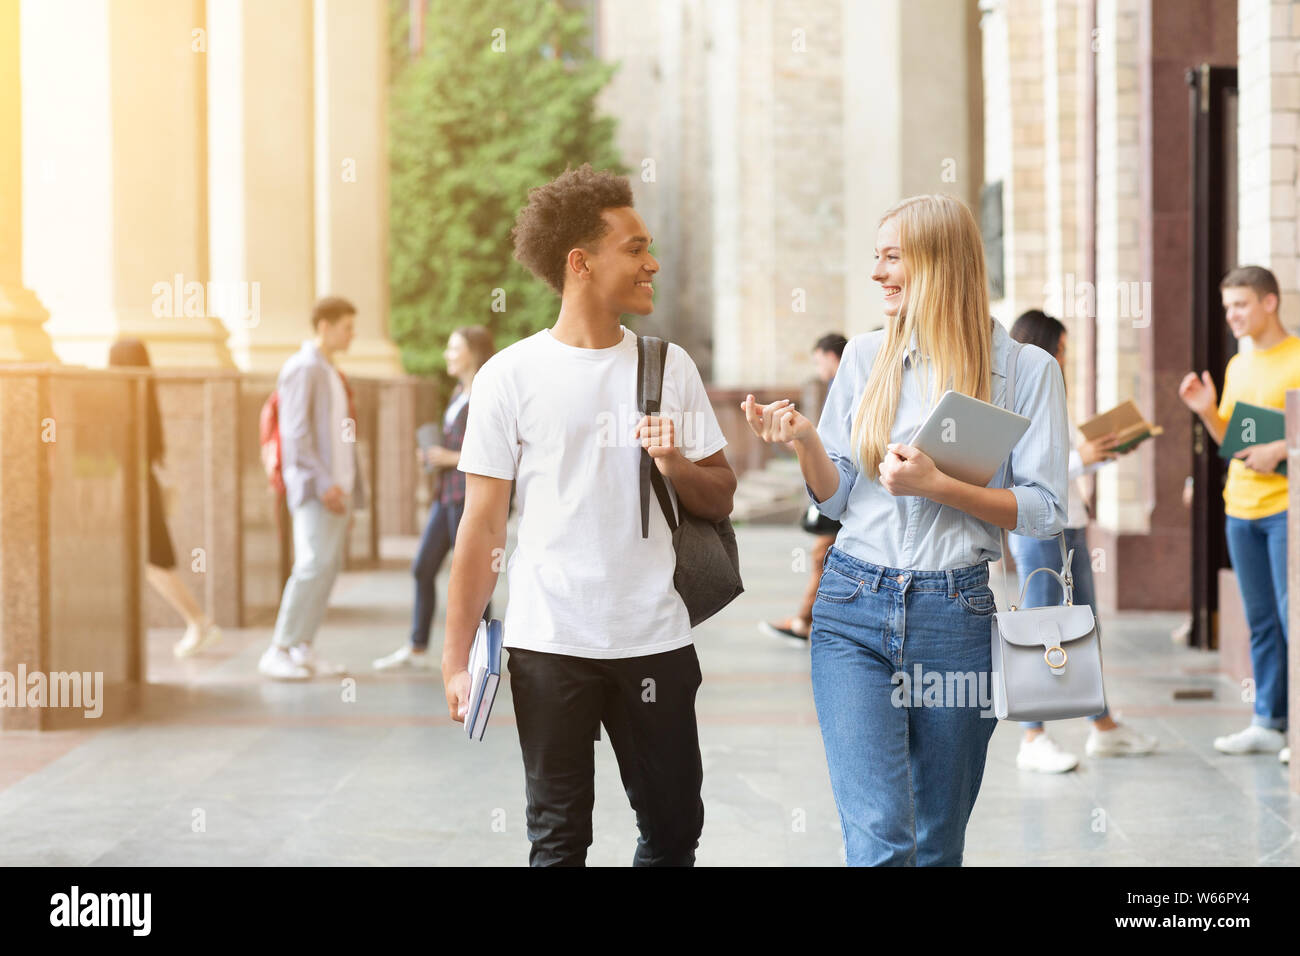 Education concept. Students walking in university campus Stock Photo